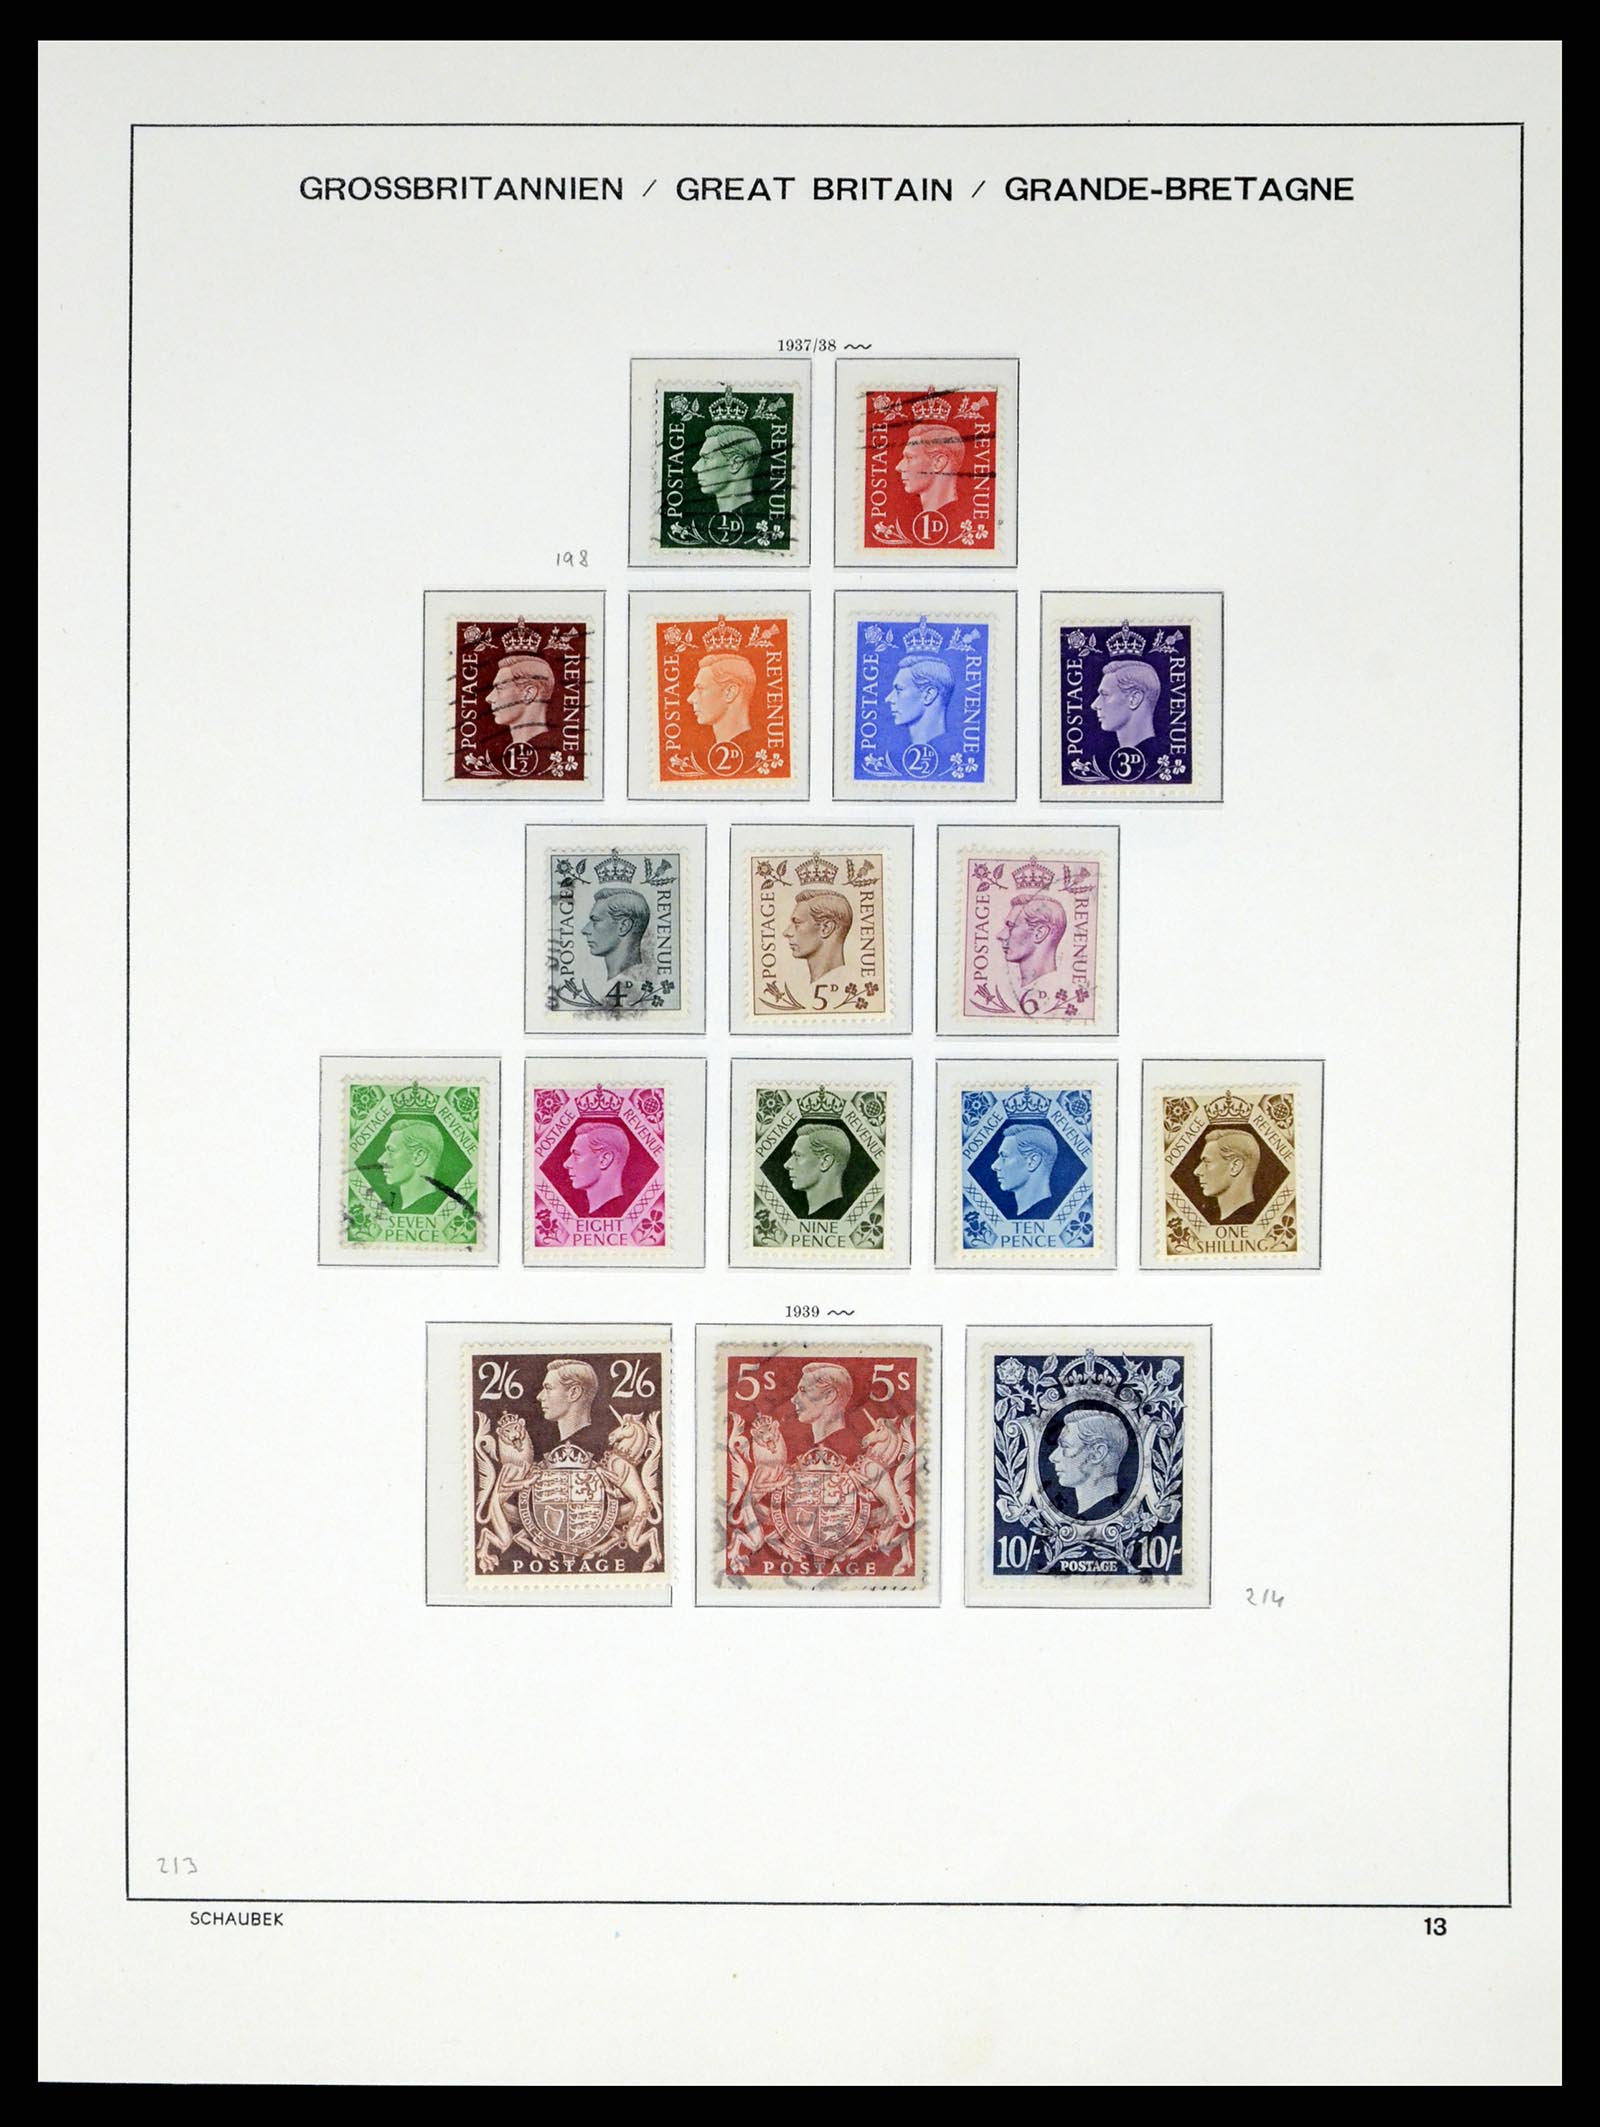 37310 016 - Stamp collection 37310 Great Britain 1840-1988.